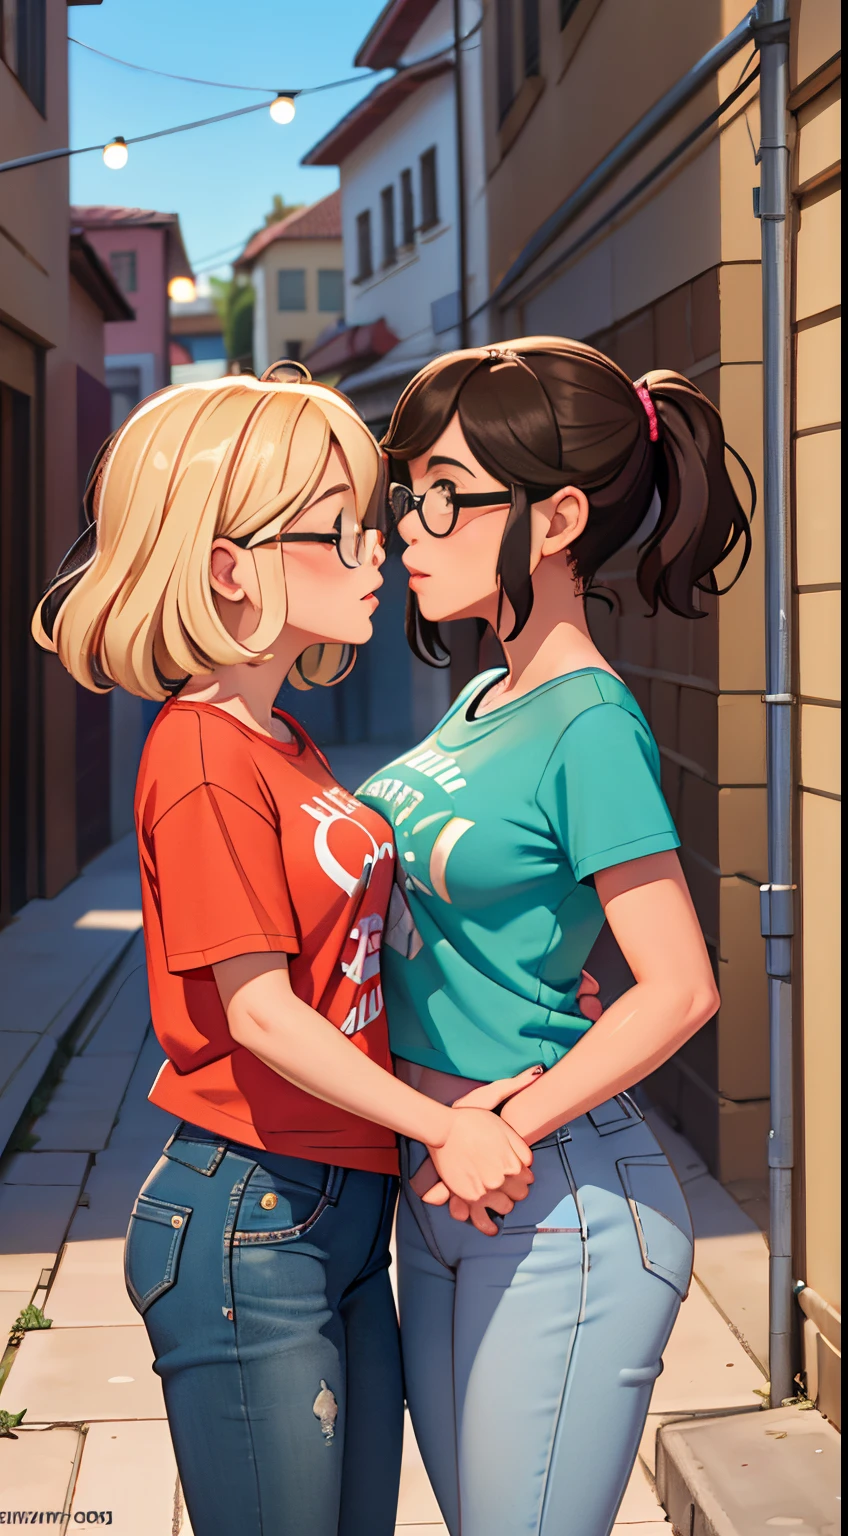 Two women having fun in an alley, playful: 1,2, hentai: 1,2, NSFW: 1,2, little lesbian: 1,2, grabbing the, kissing each other, blushing, wet sleeveless t-shirt, Shorts, glasses, anatomically correct